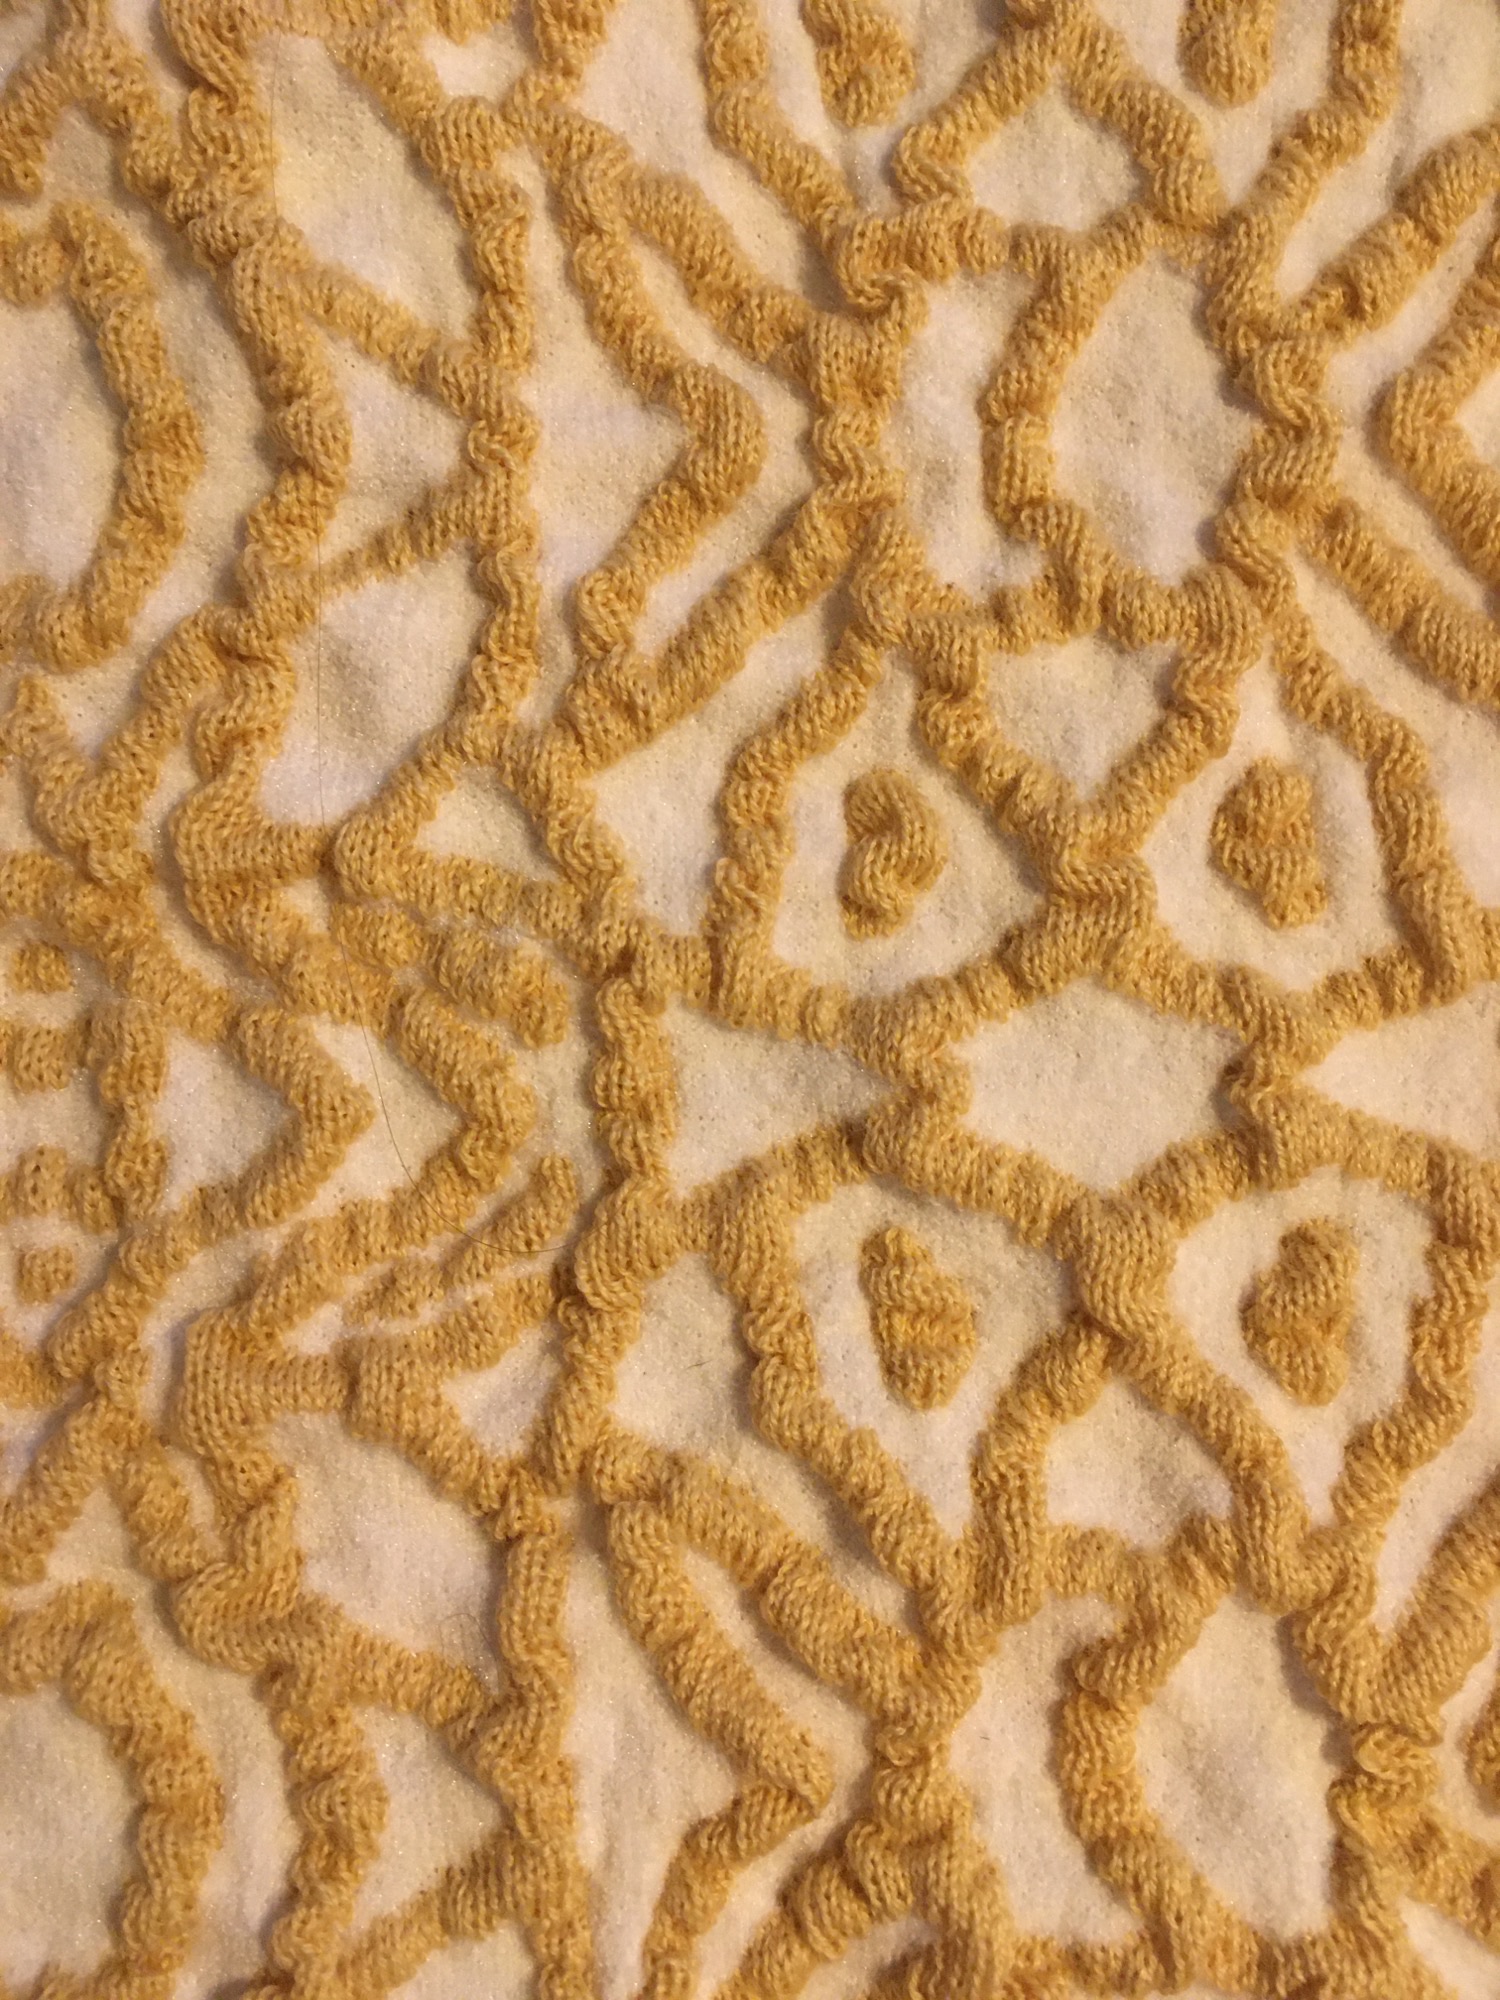 Textile design using Pemotex and steam to create a tactile surface using ordinary yarn of wool and acrylic. Made by design student Cecilie Lindskjold, VIA University College, VIA Design and Business.